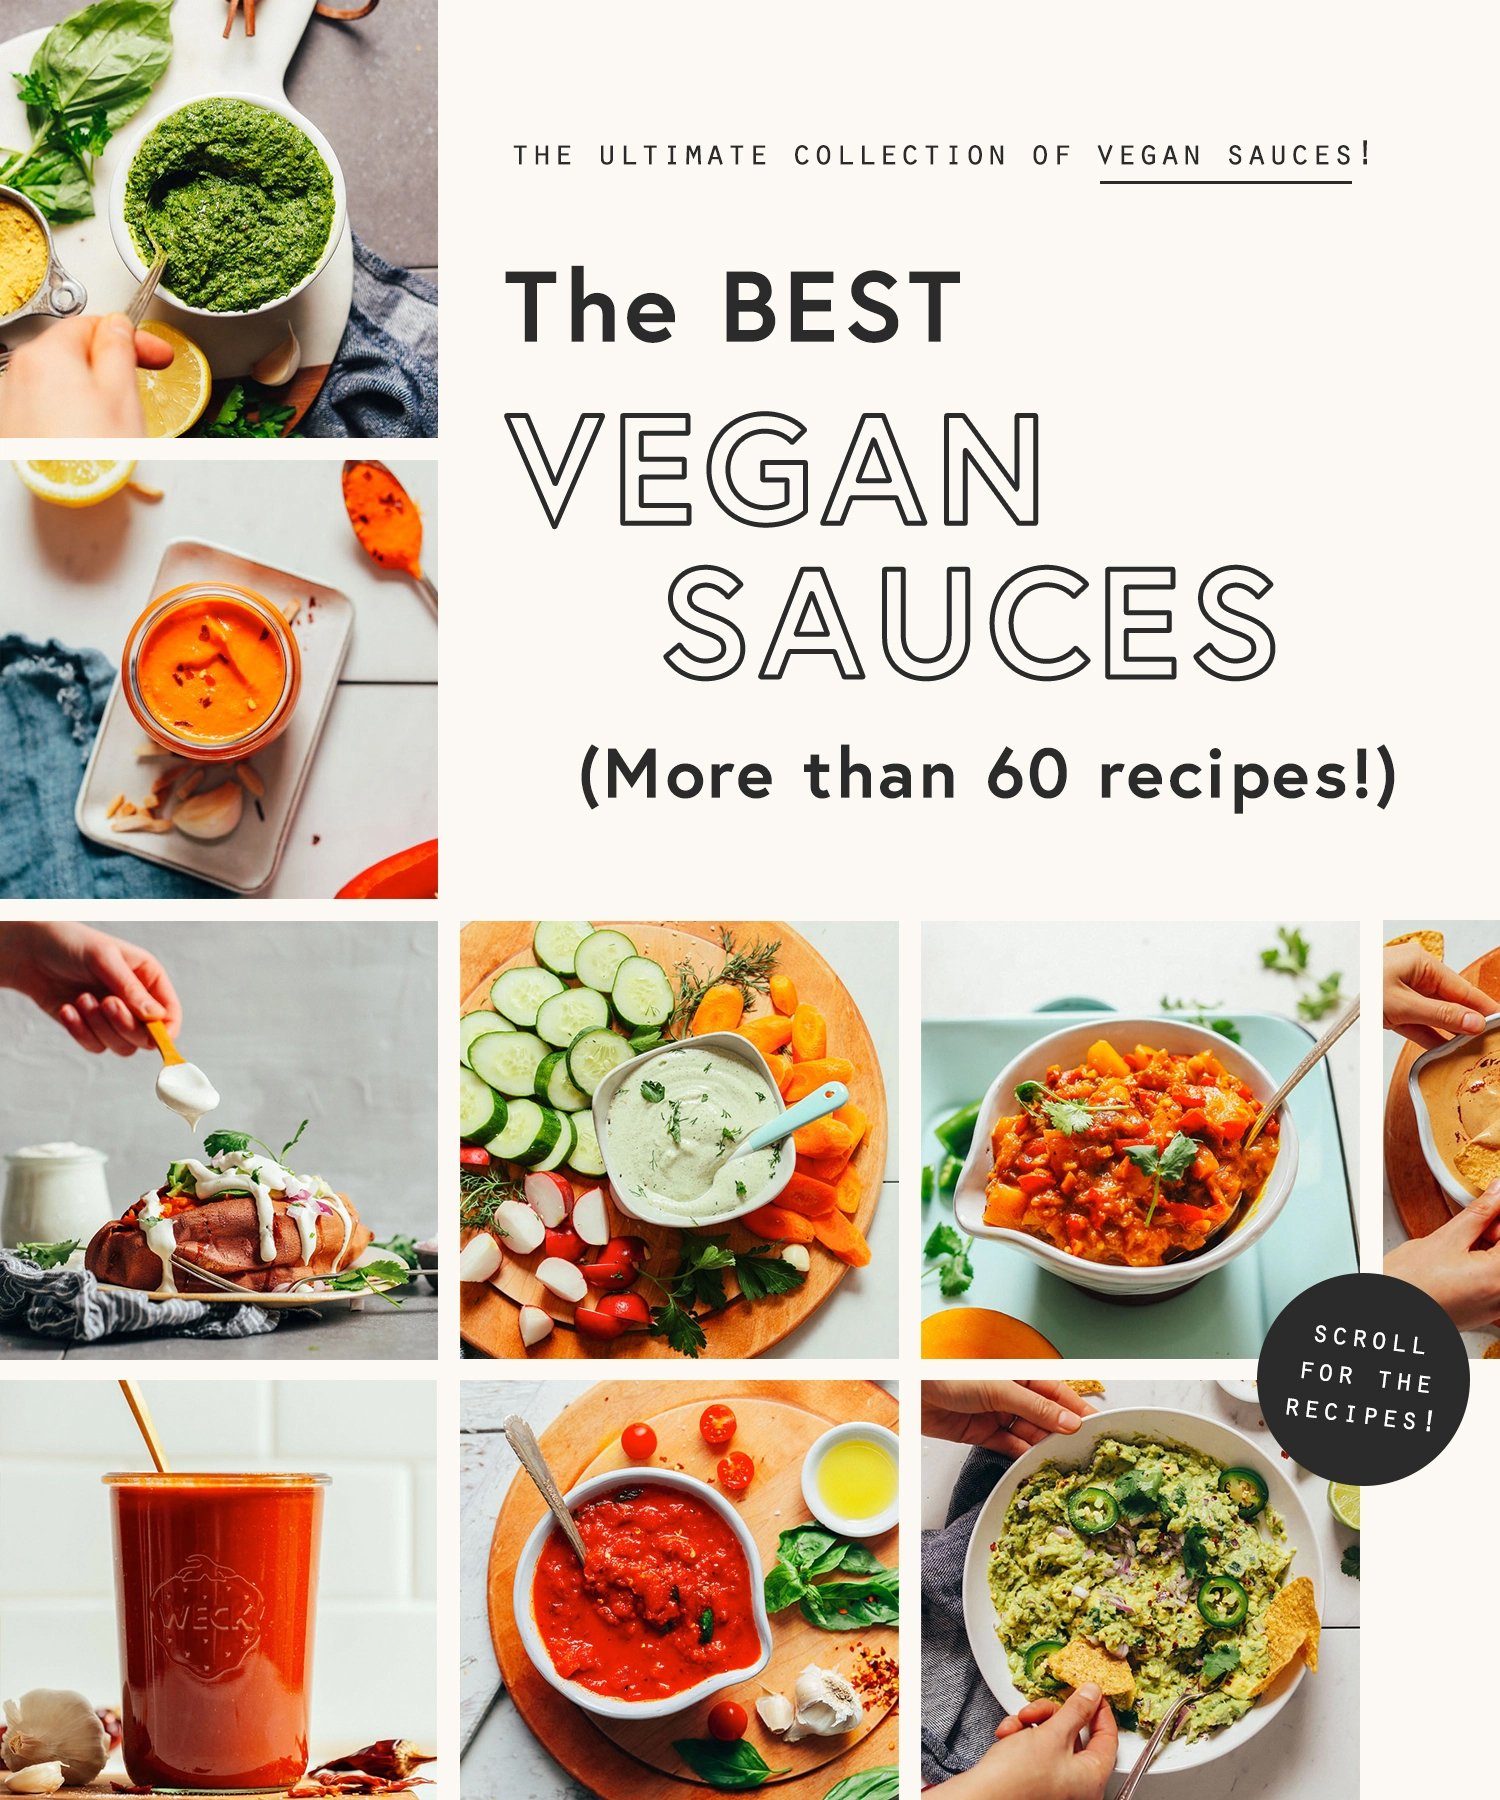 Collection of the best vegan sauces for bowls, dipping, and more